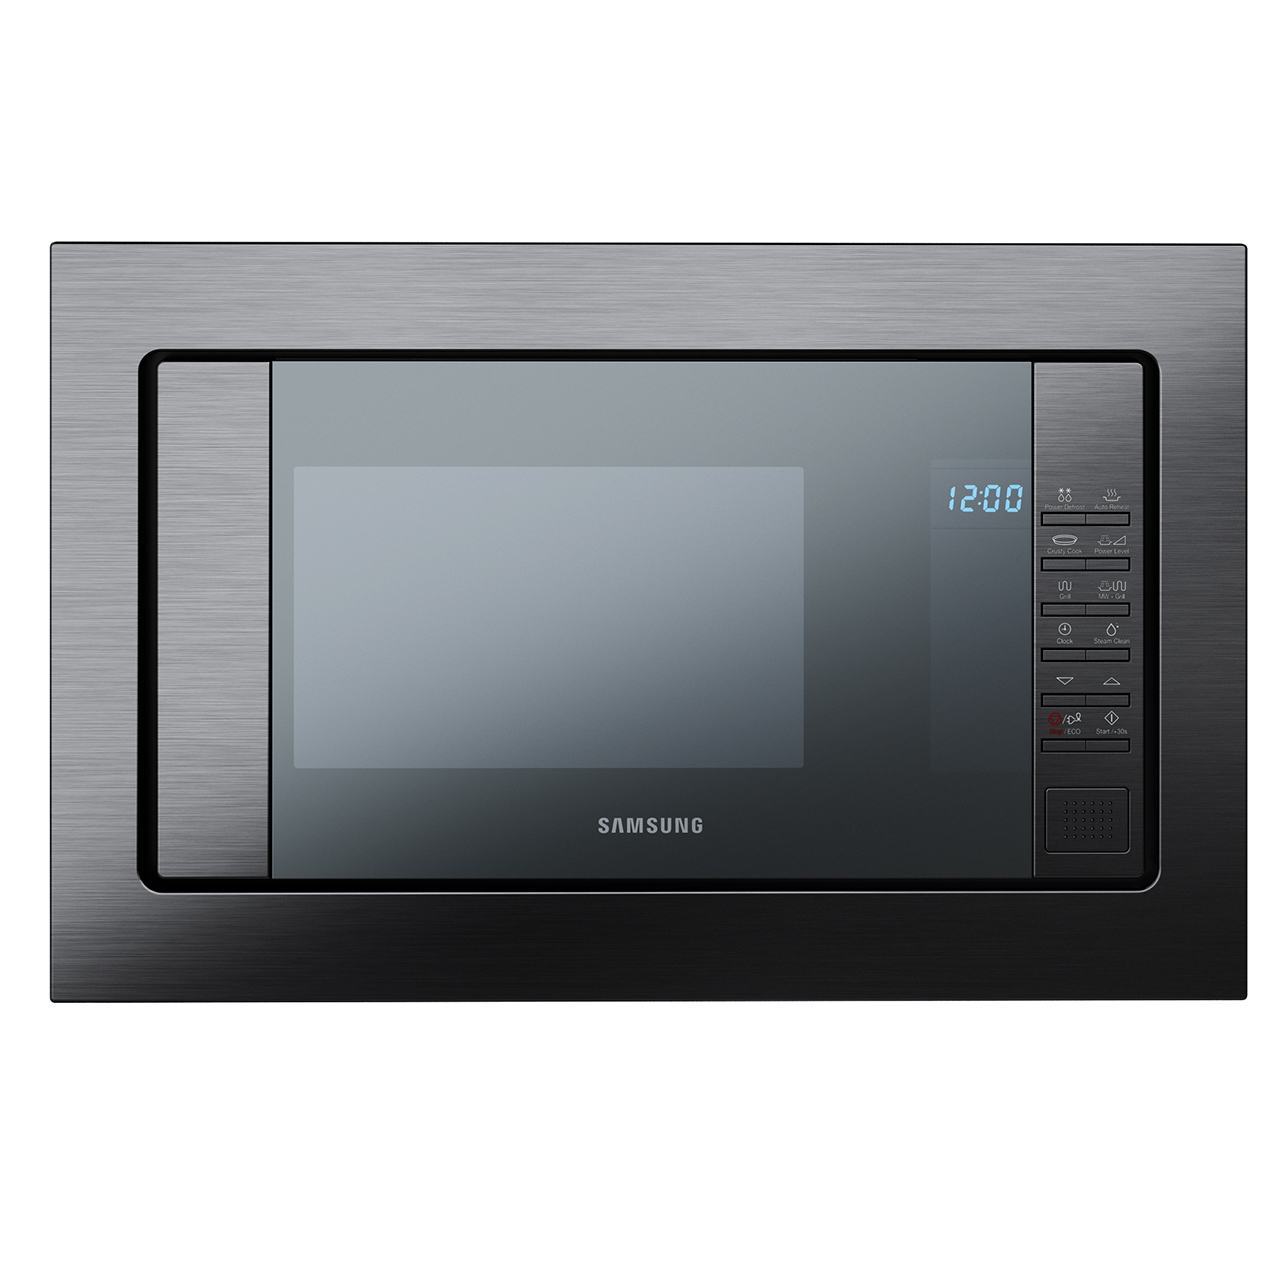 built-in-microwave-oven-grill-fg87-by-samsung.jpg